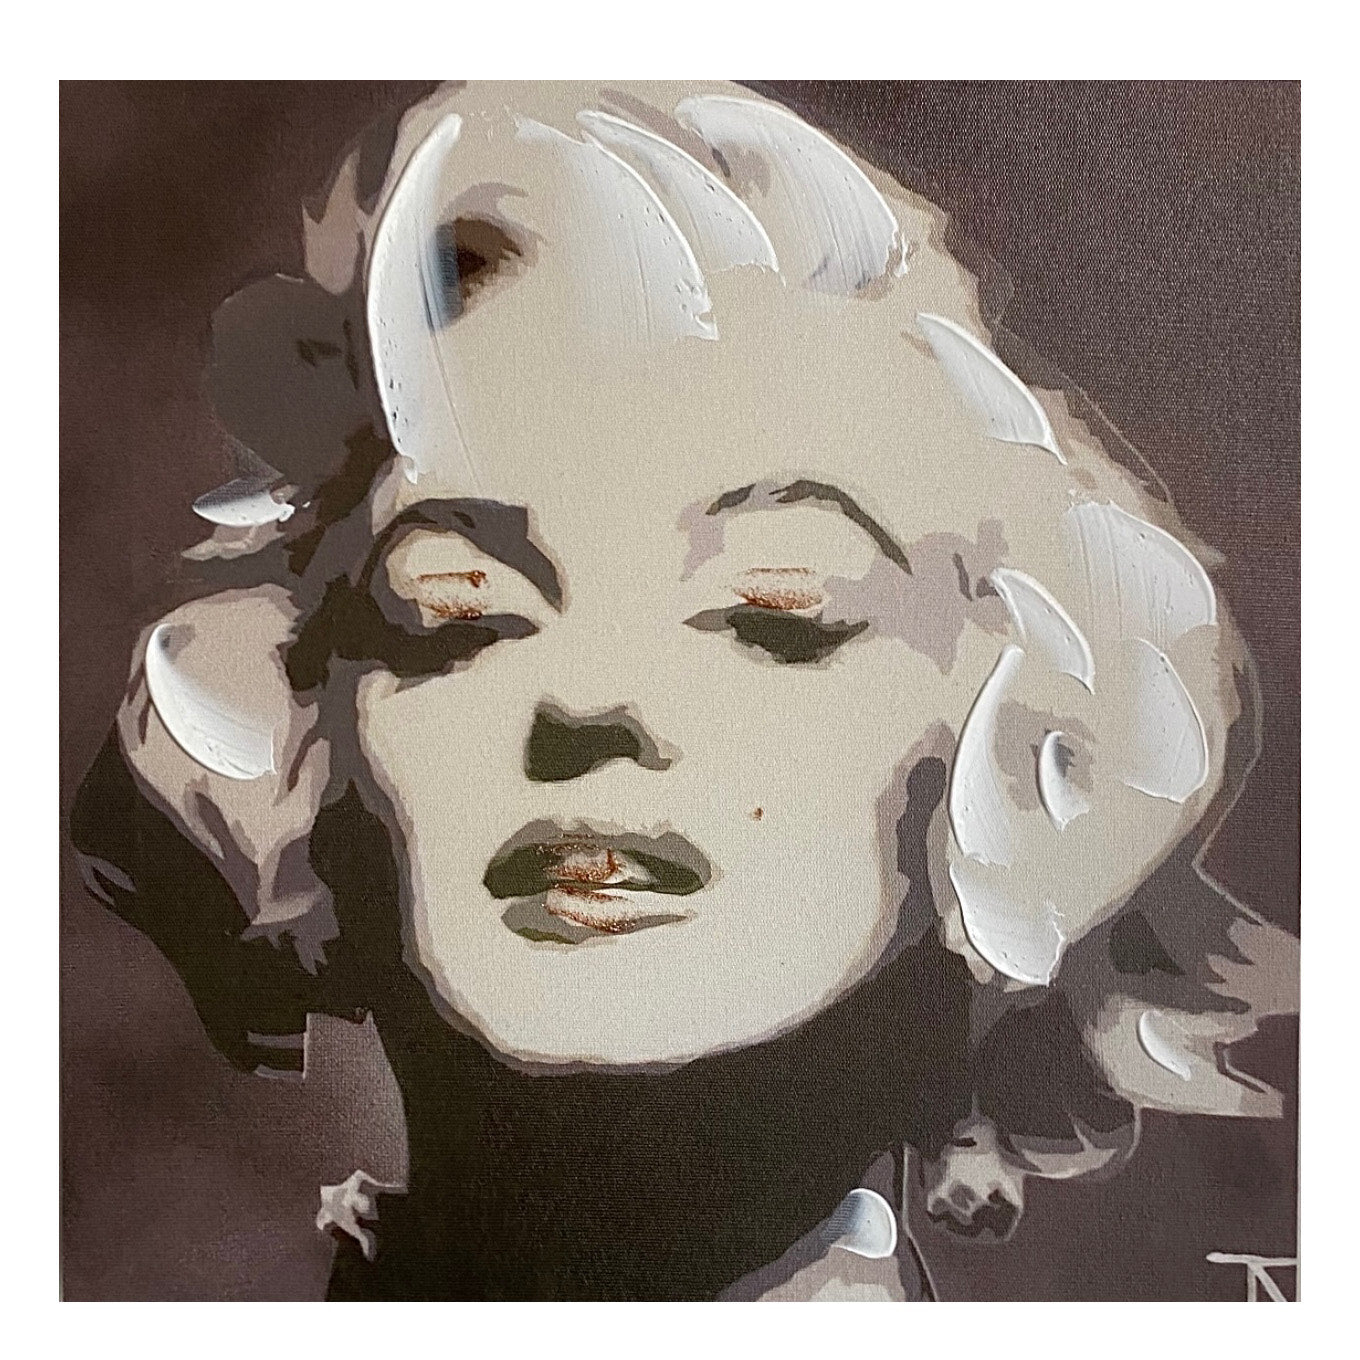 Marilyn Monroe raised painting canvas art 12 x 12 arrives ready with no additional framing required. Every canvas print is hand-crafted in the USA. Let this glamorous beauty icon light up any room in your home.